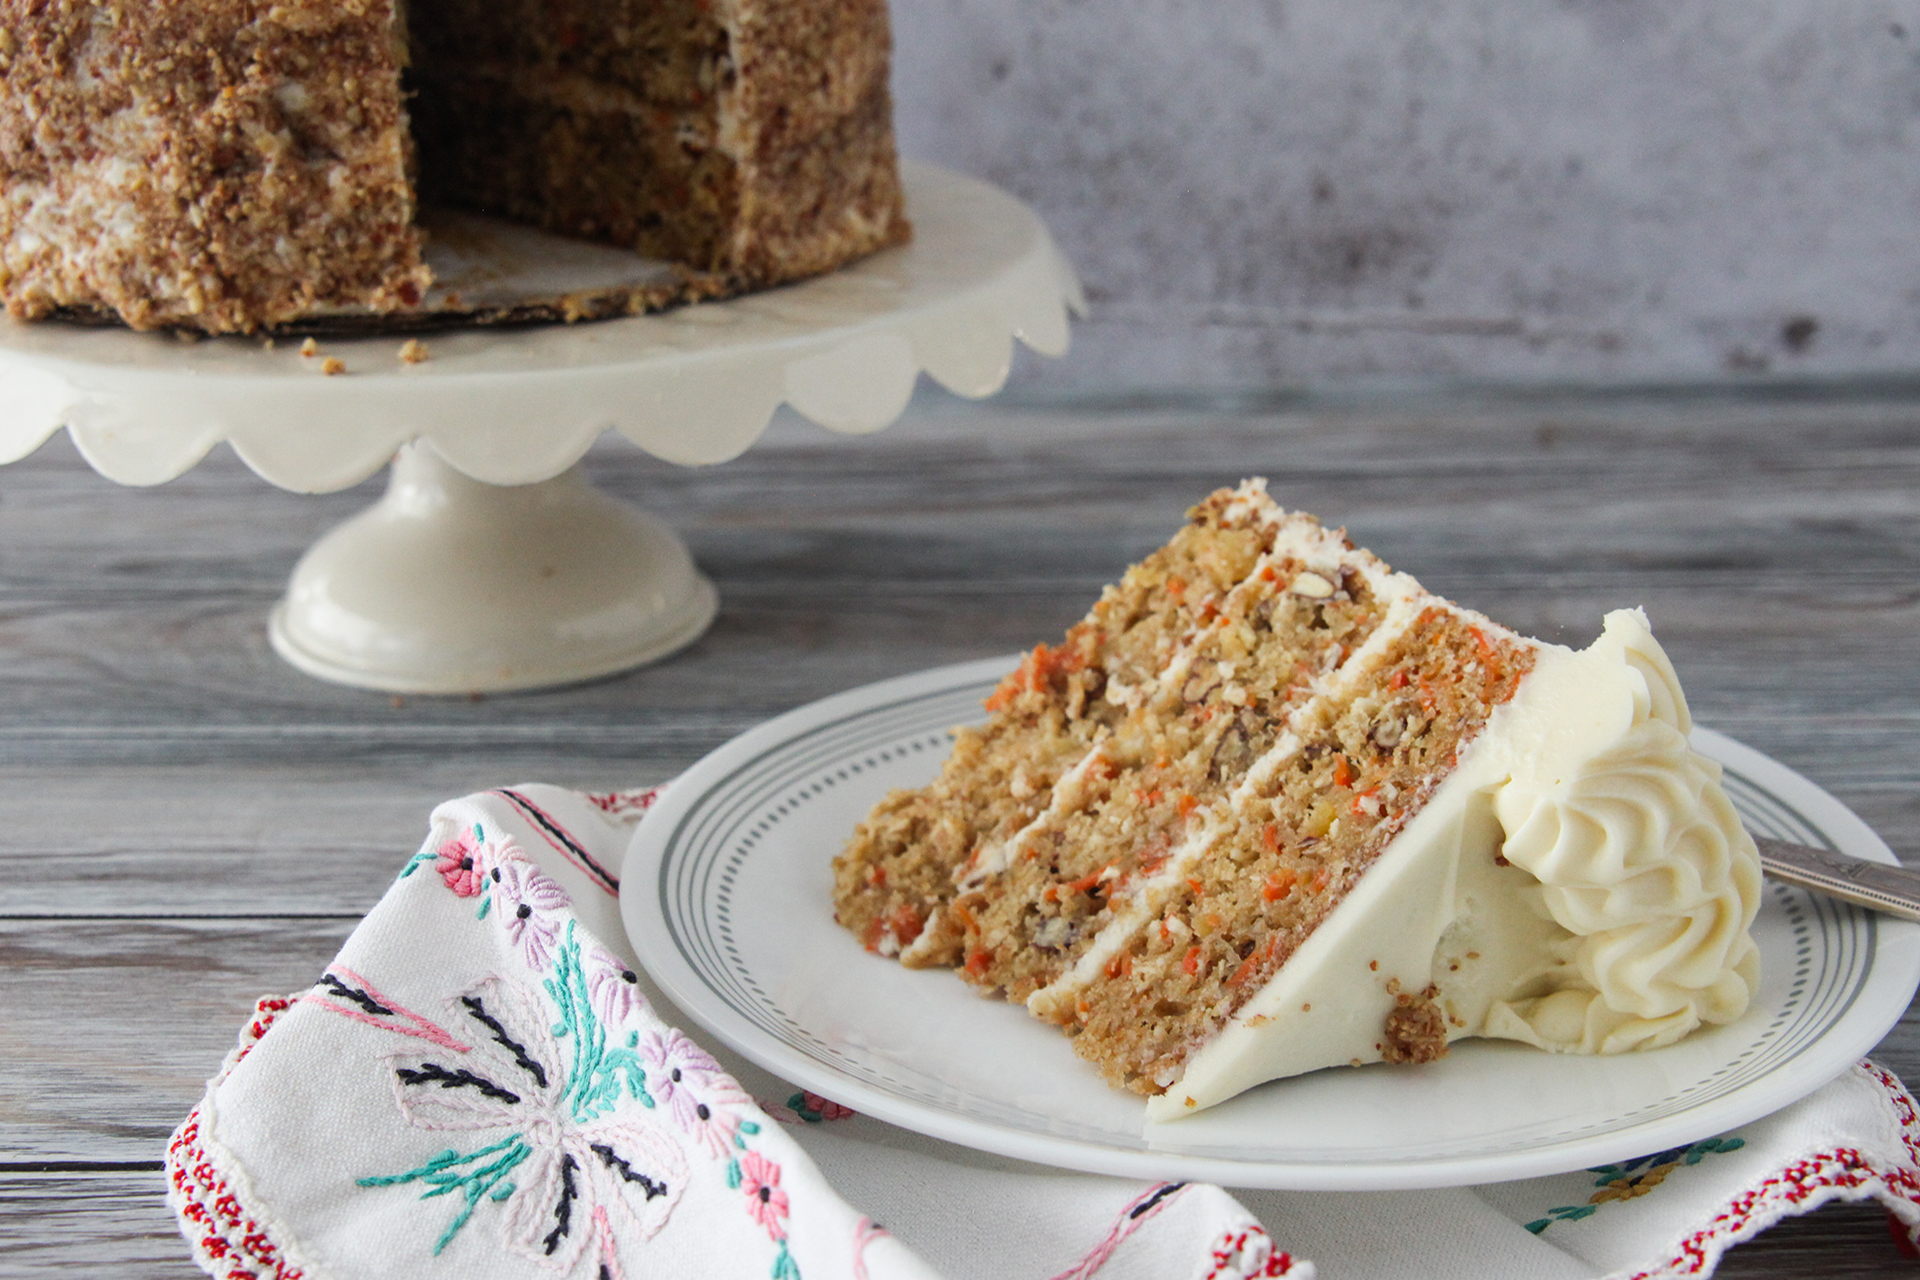 Carrot Cake With Plated Slice